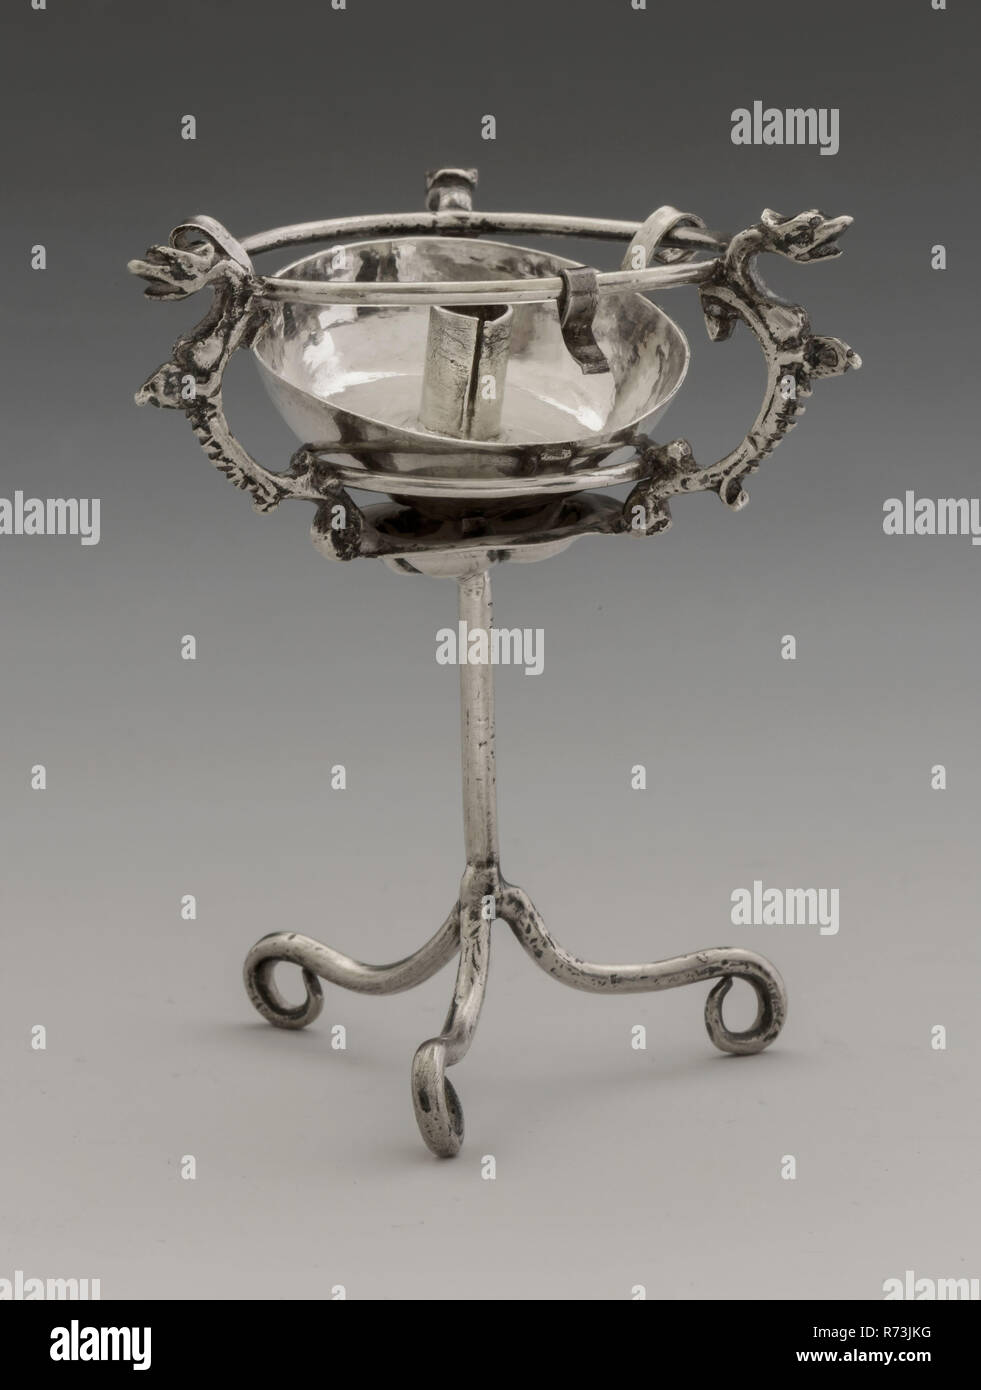 Silver miniature sconce with stand, sconce dolls toy relaxant miniature model silver, Round sconce with three hooks hanging on stand; standard consists of two rings and receptacle that are connected to each other by three volutes with dragon's head. This whole stands on stem that ends in three volute-shaped paws to decorate illuminate home interior Stock Photo